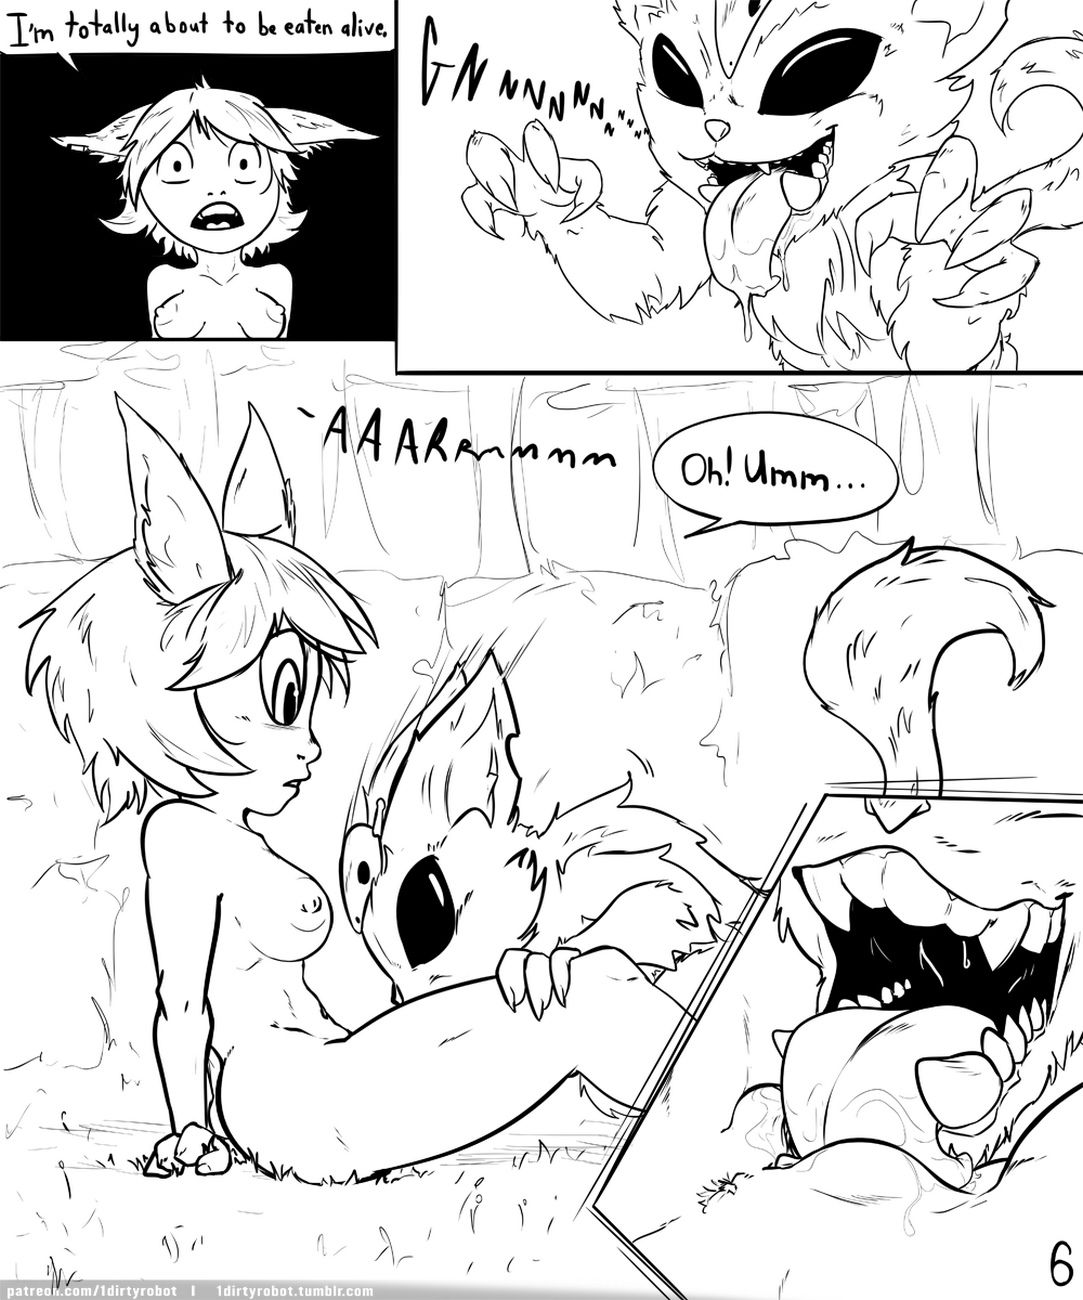 Big Trouble In Little Yordle page 1